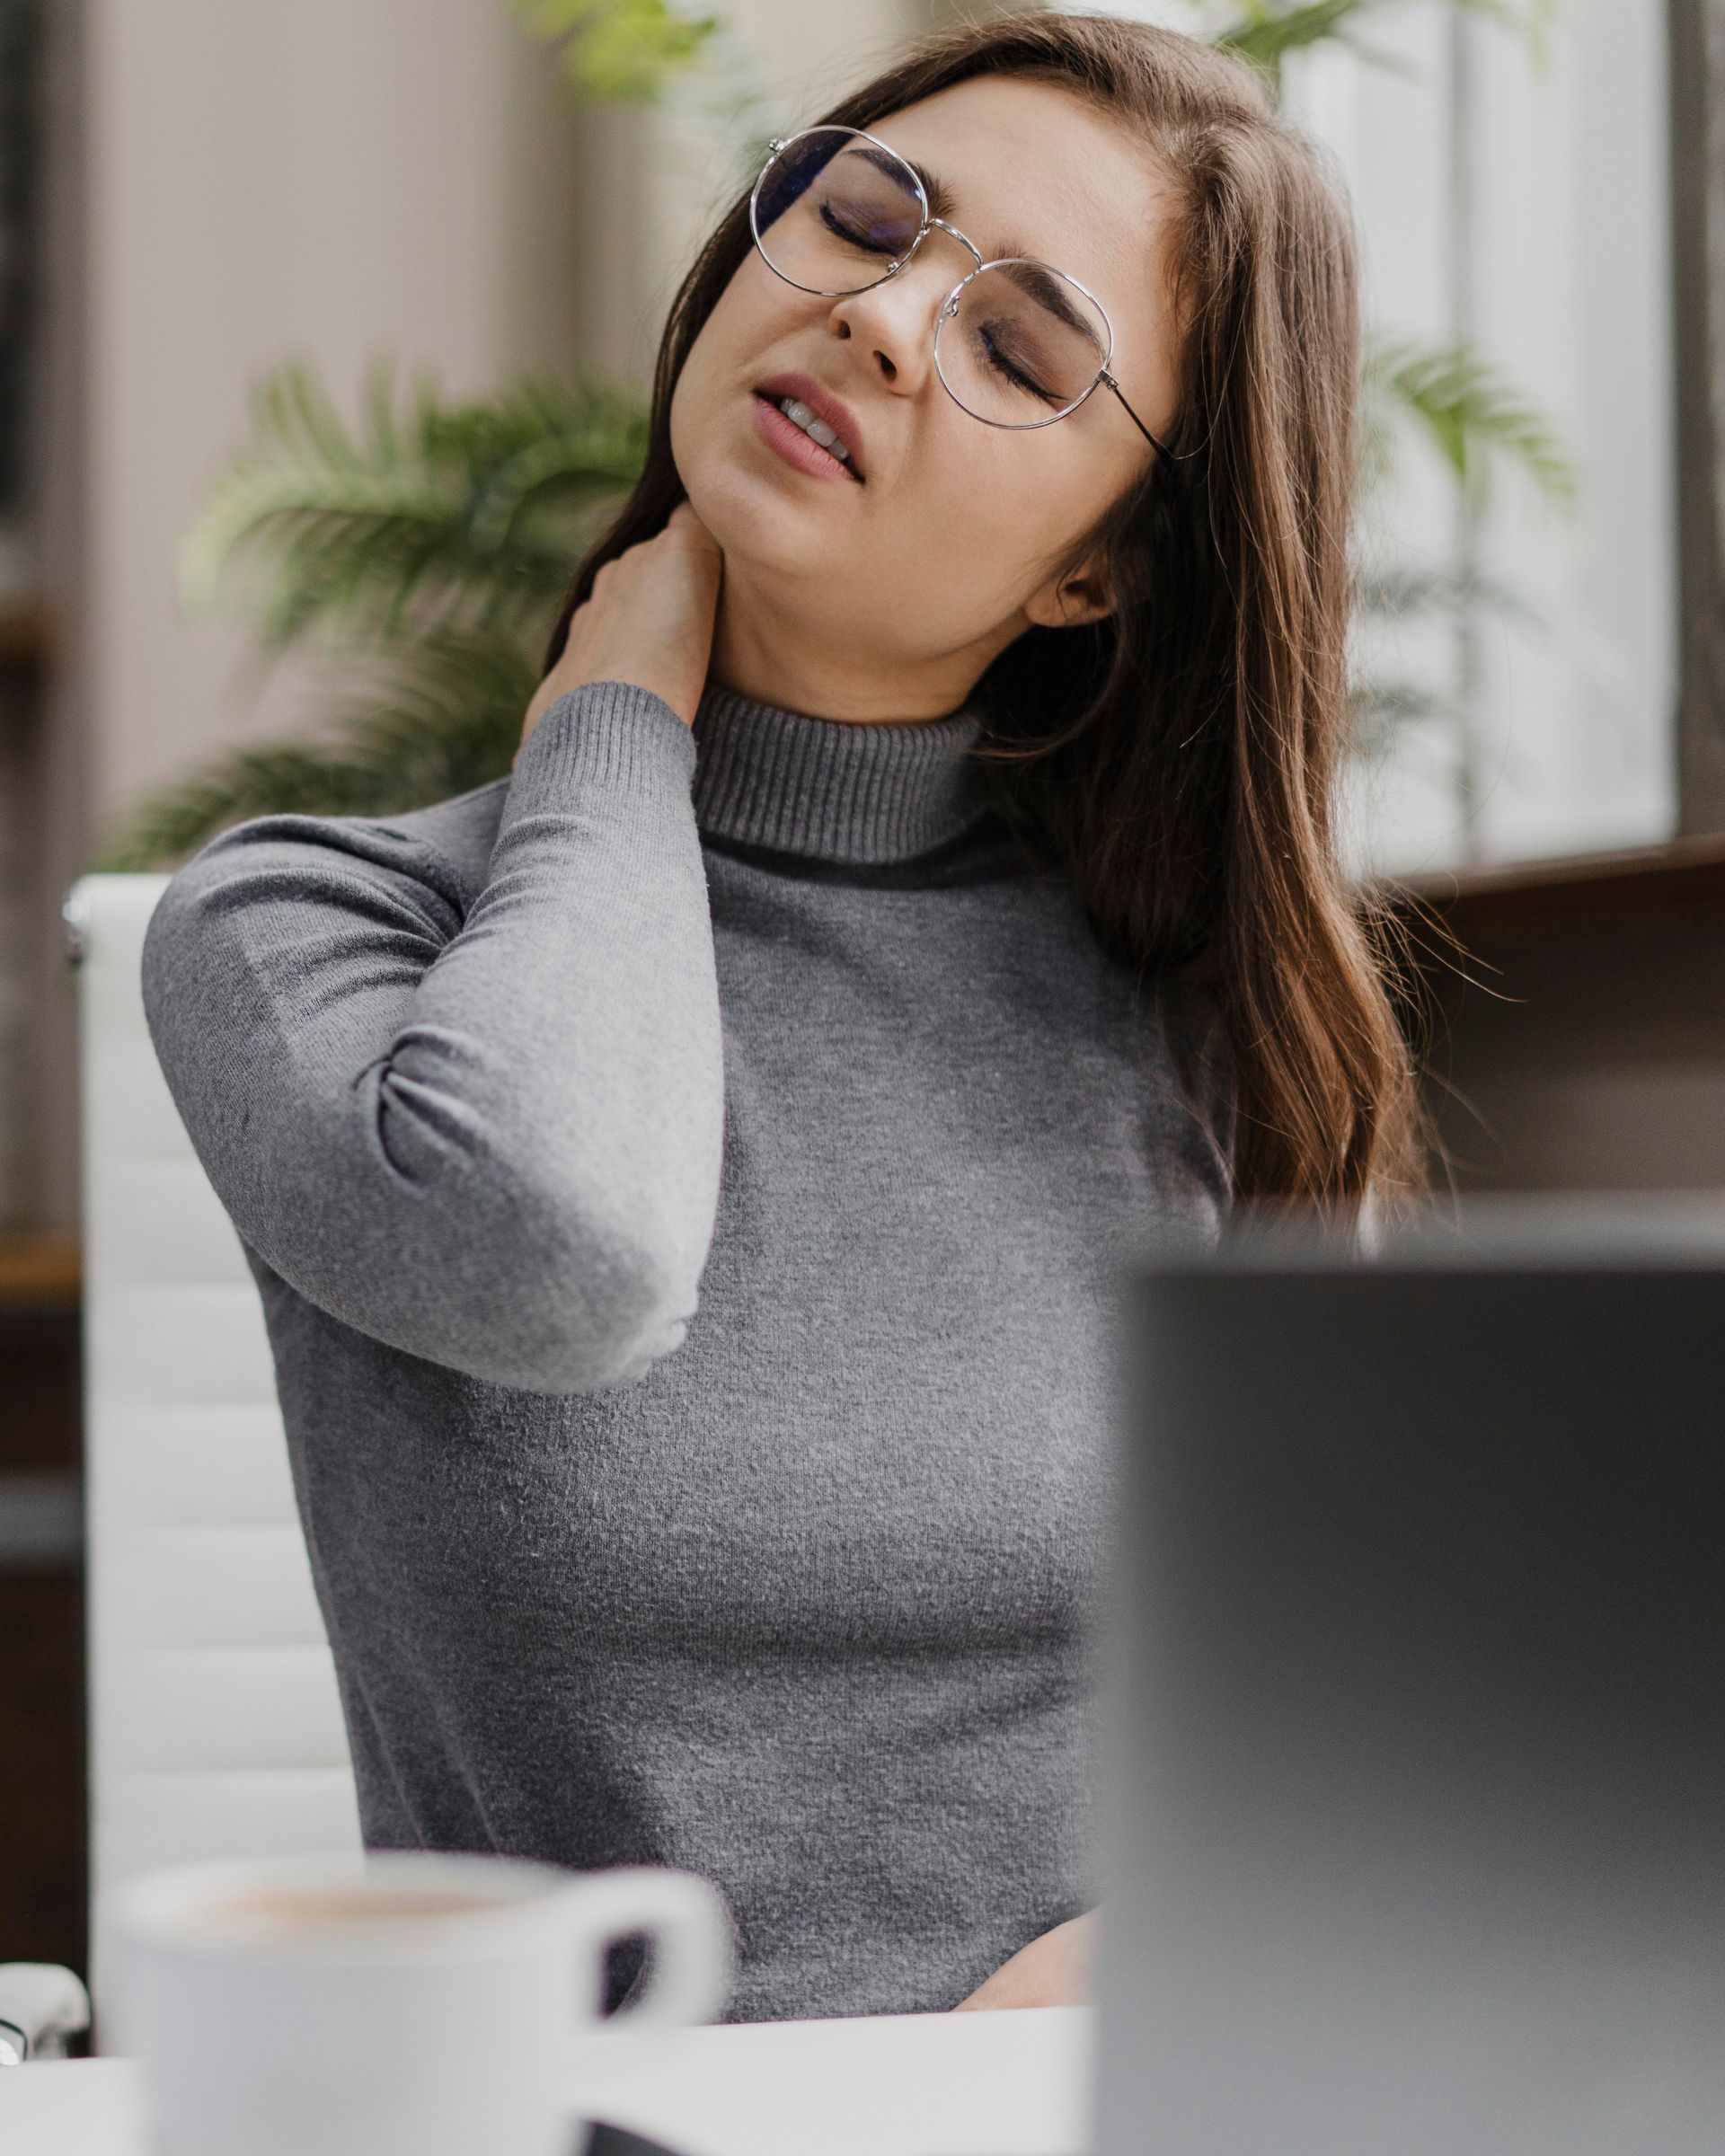 a woman wearing glasses holds her neck in pain